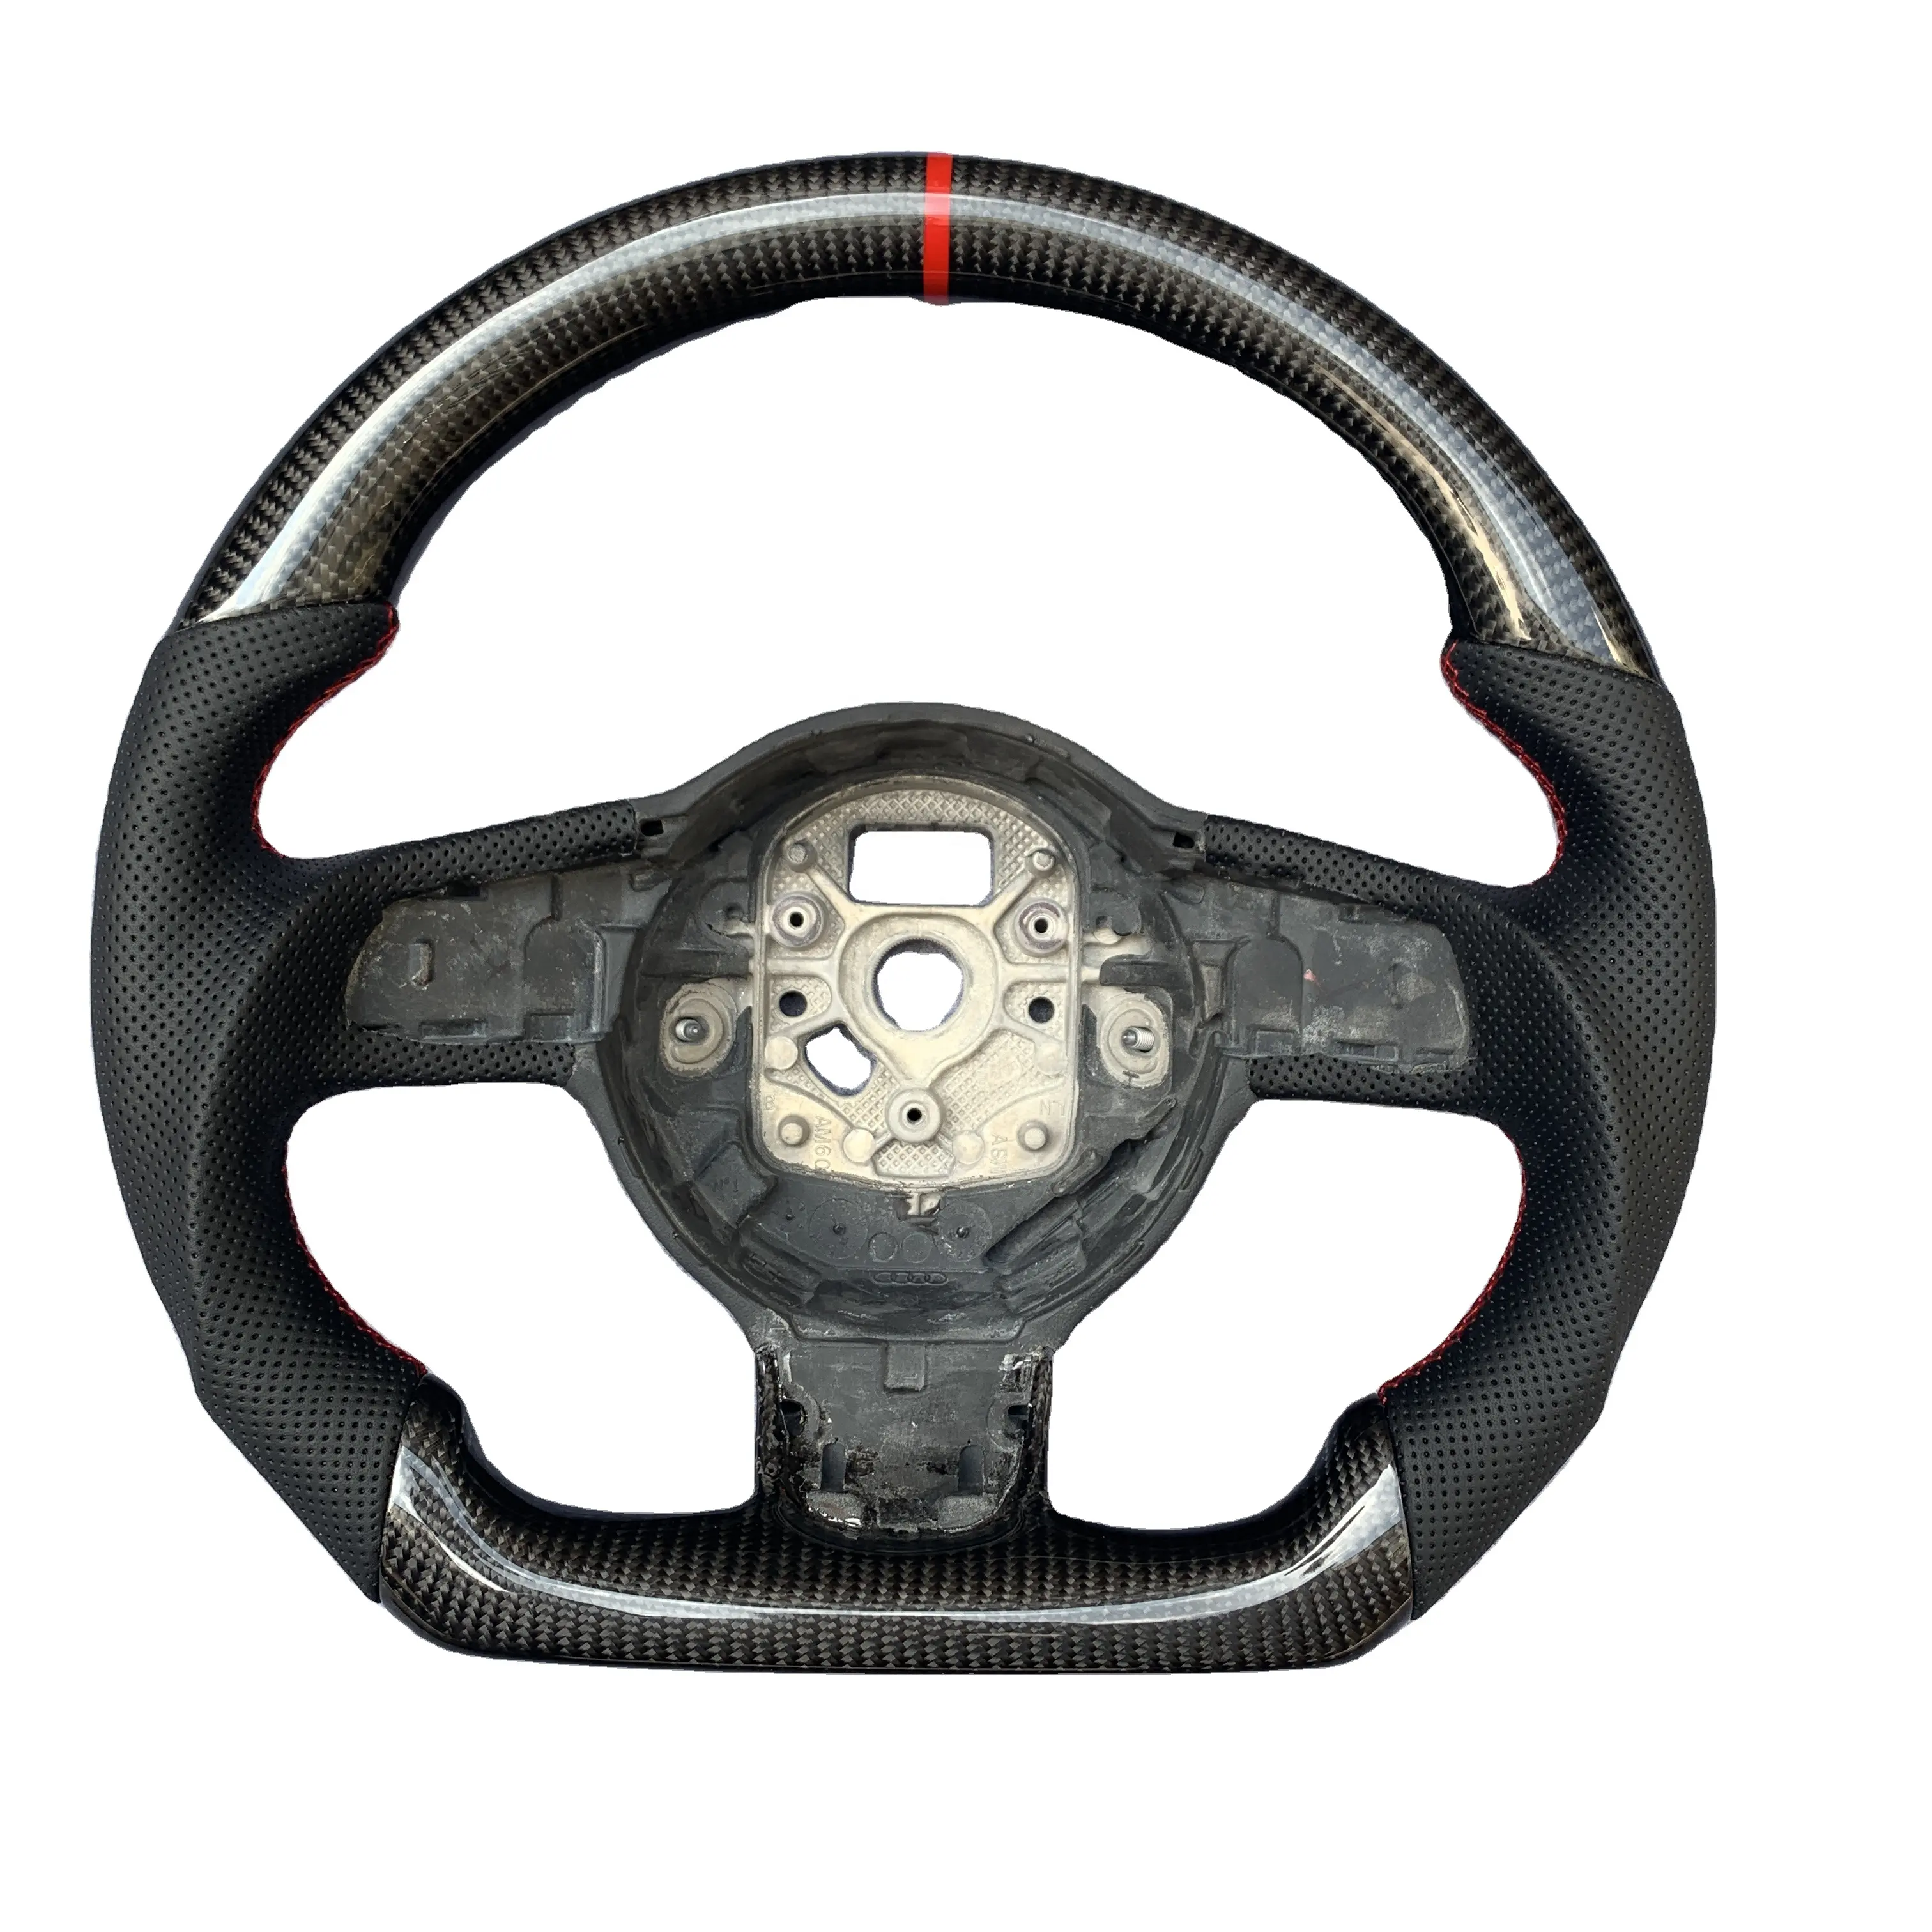 CCexcellent Customized flat bottom carbon fiber sport steering wheel racing car wheel for Audi T-T r8